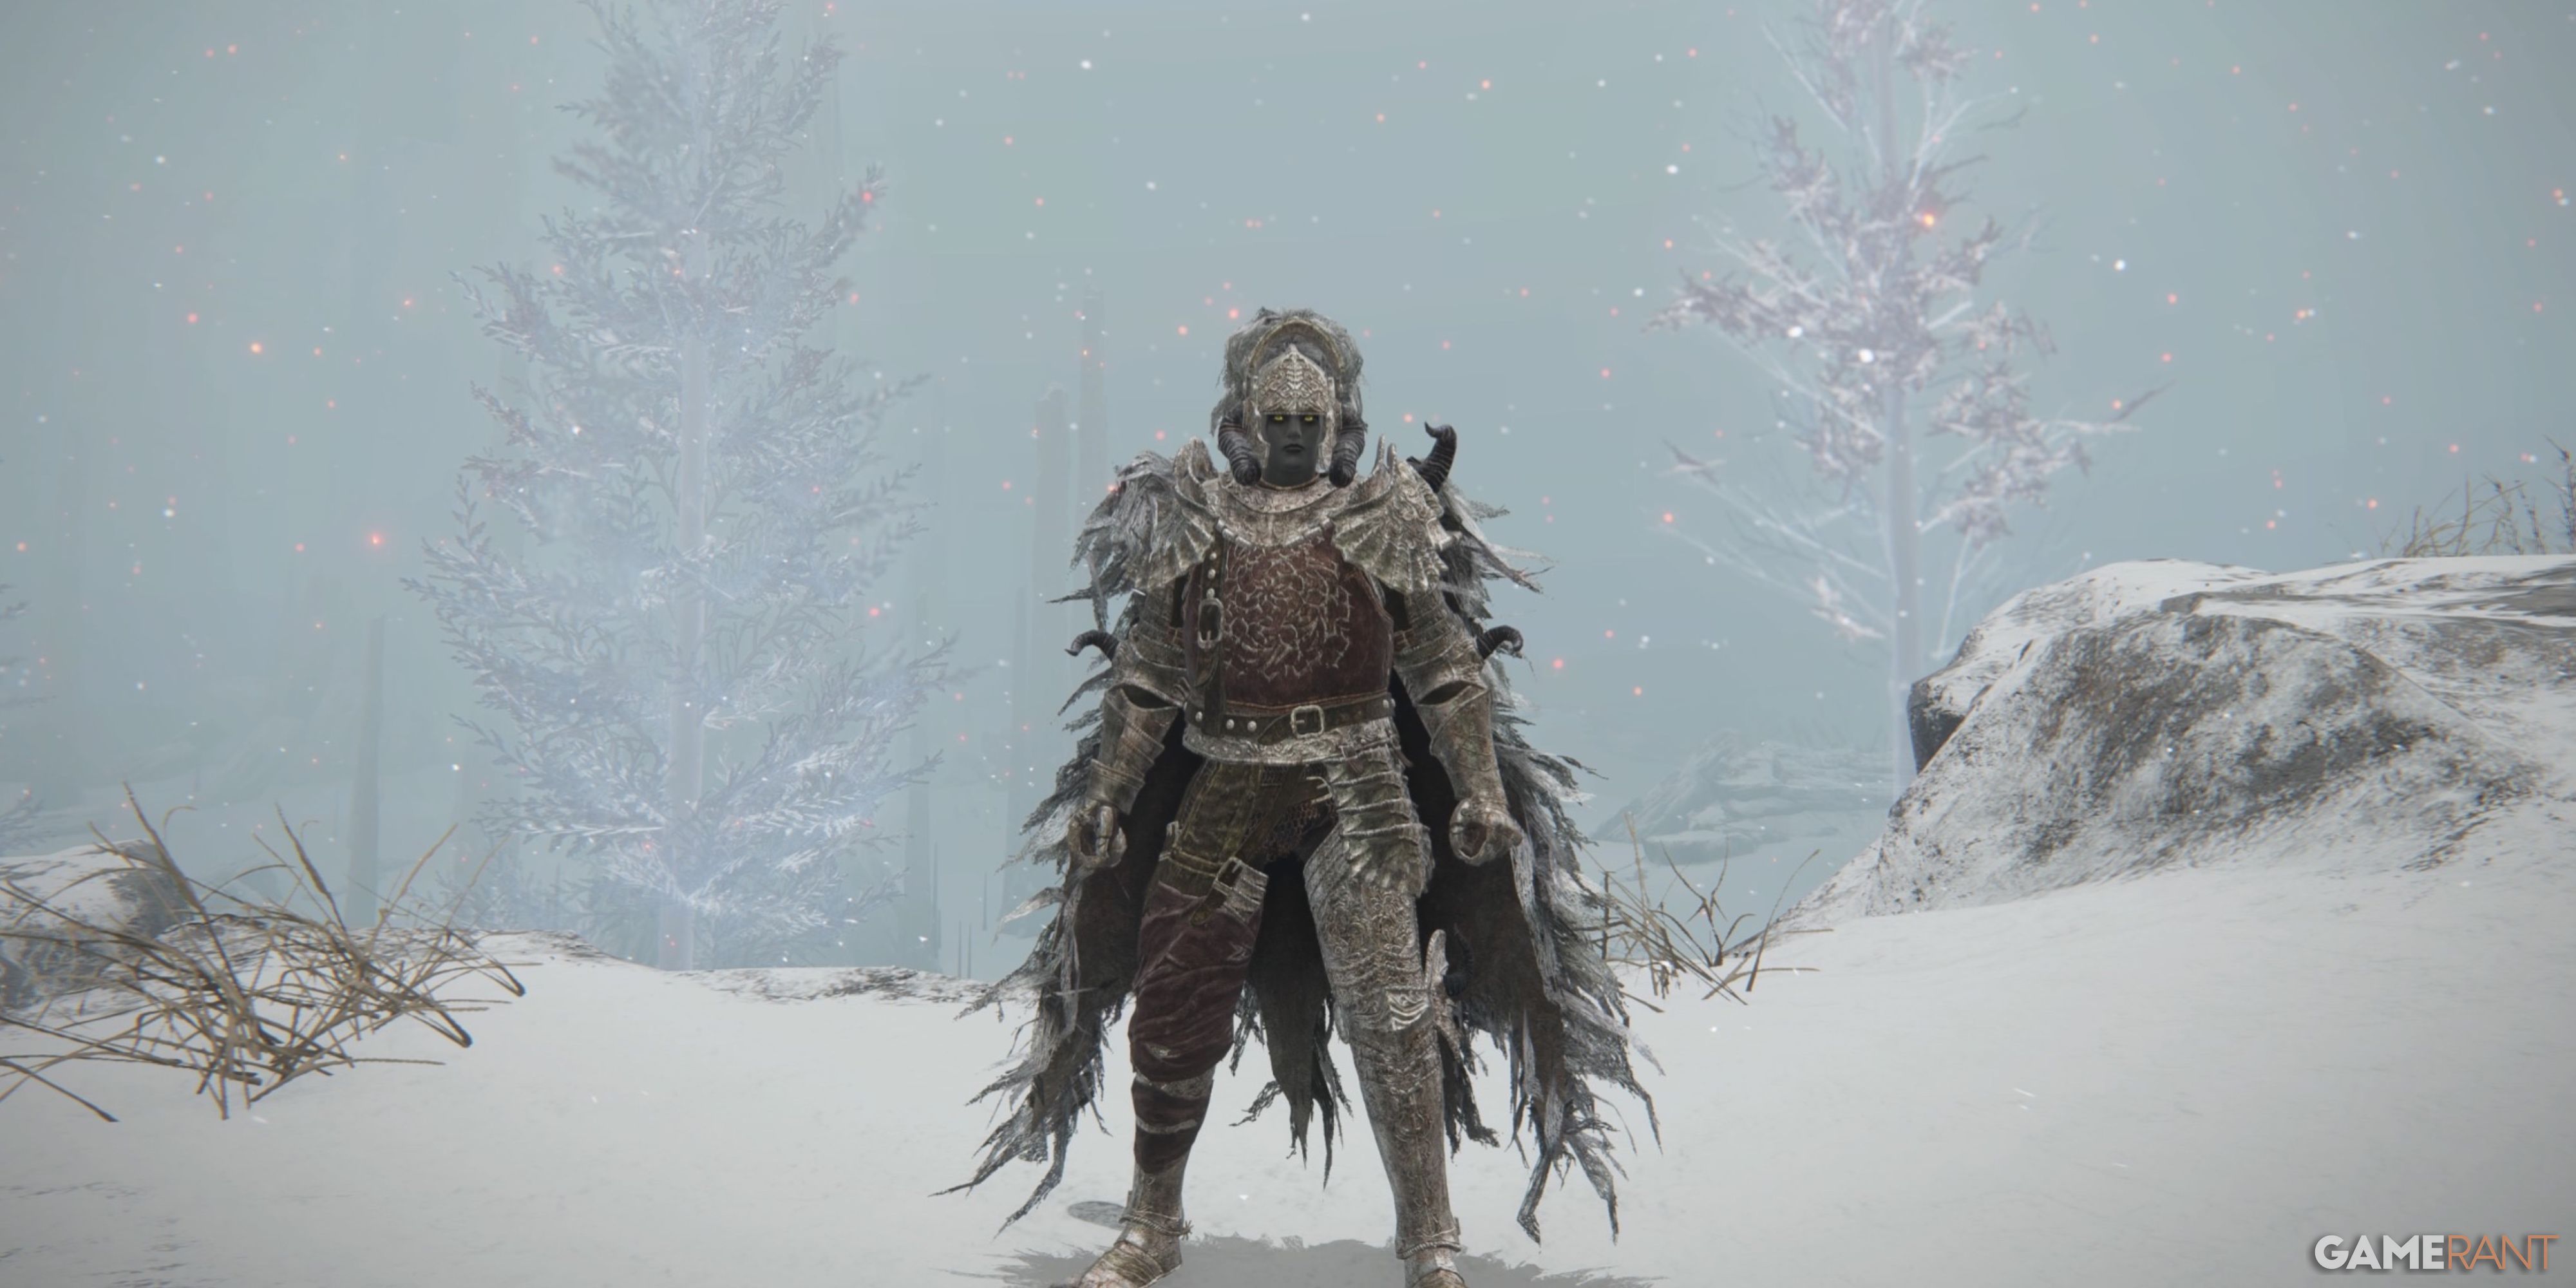 Elden Ring: 10 Best Armor For Poise Builds Character standing in a snowy landscape wearing the veteran's armor